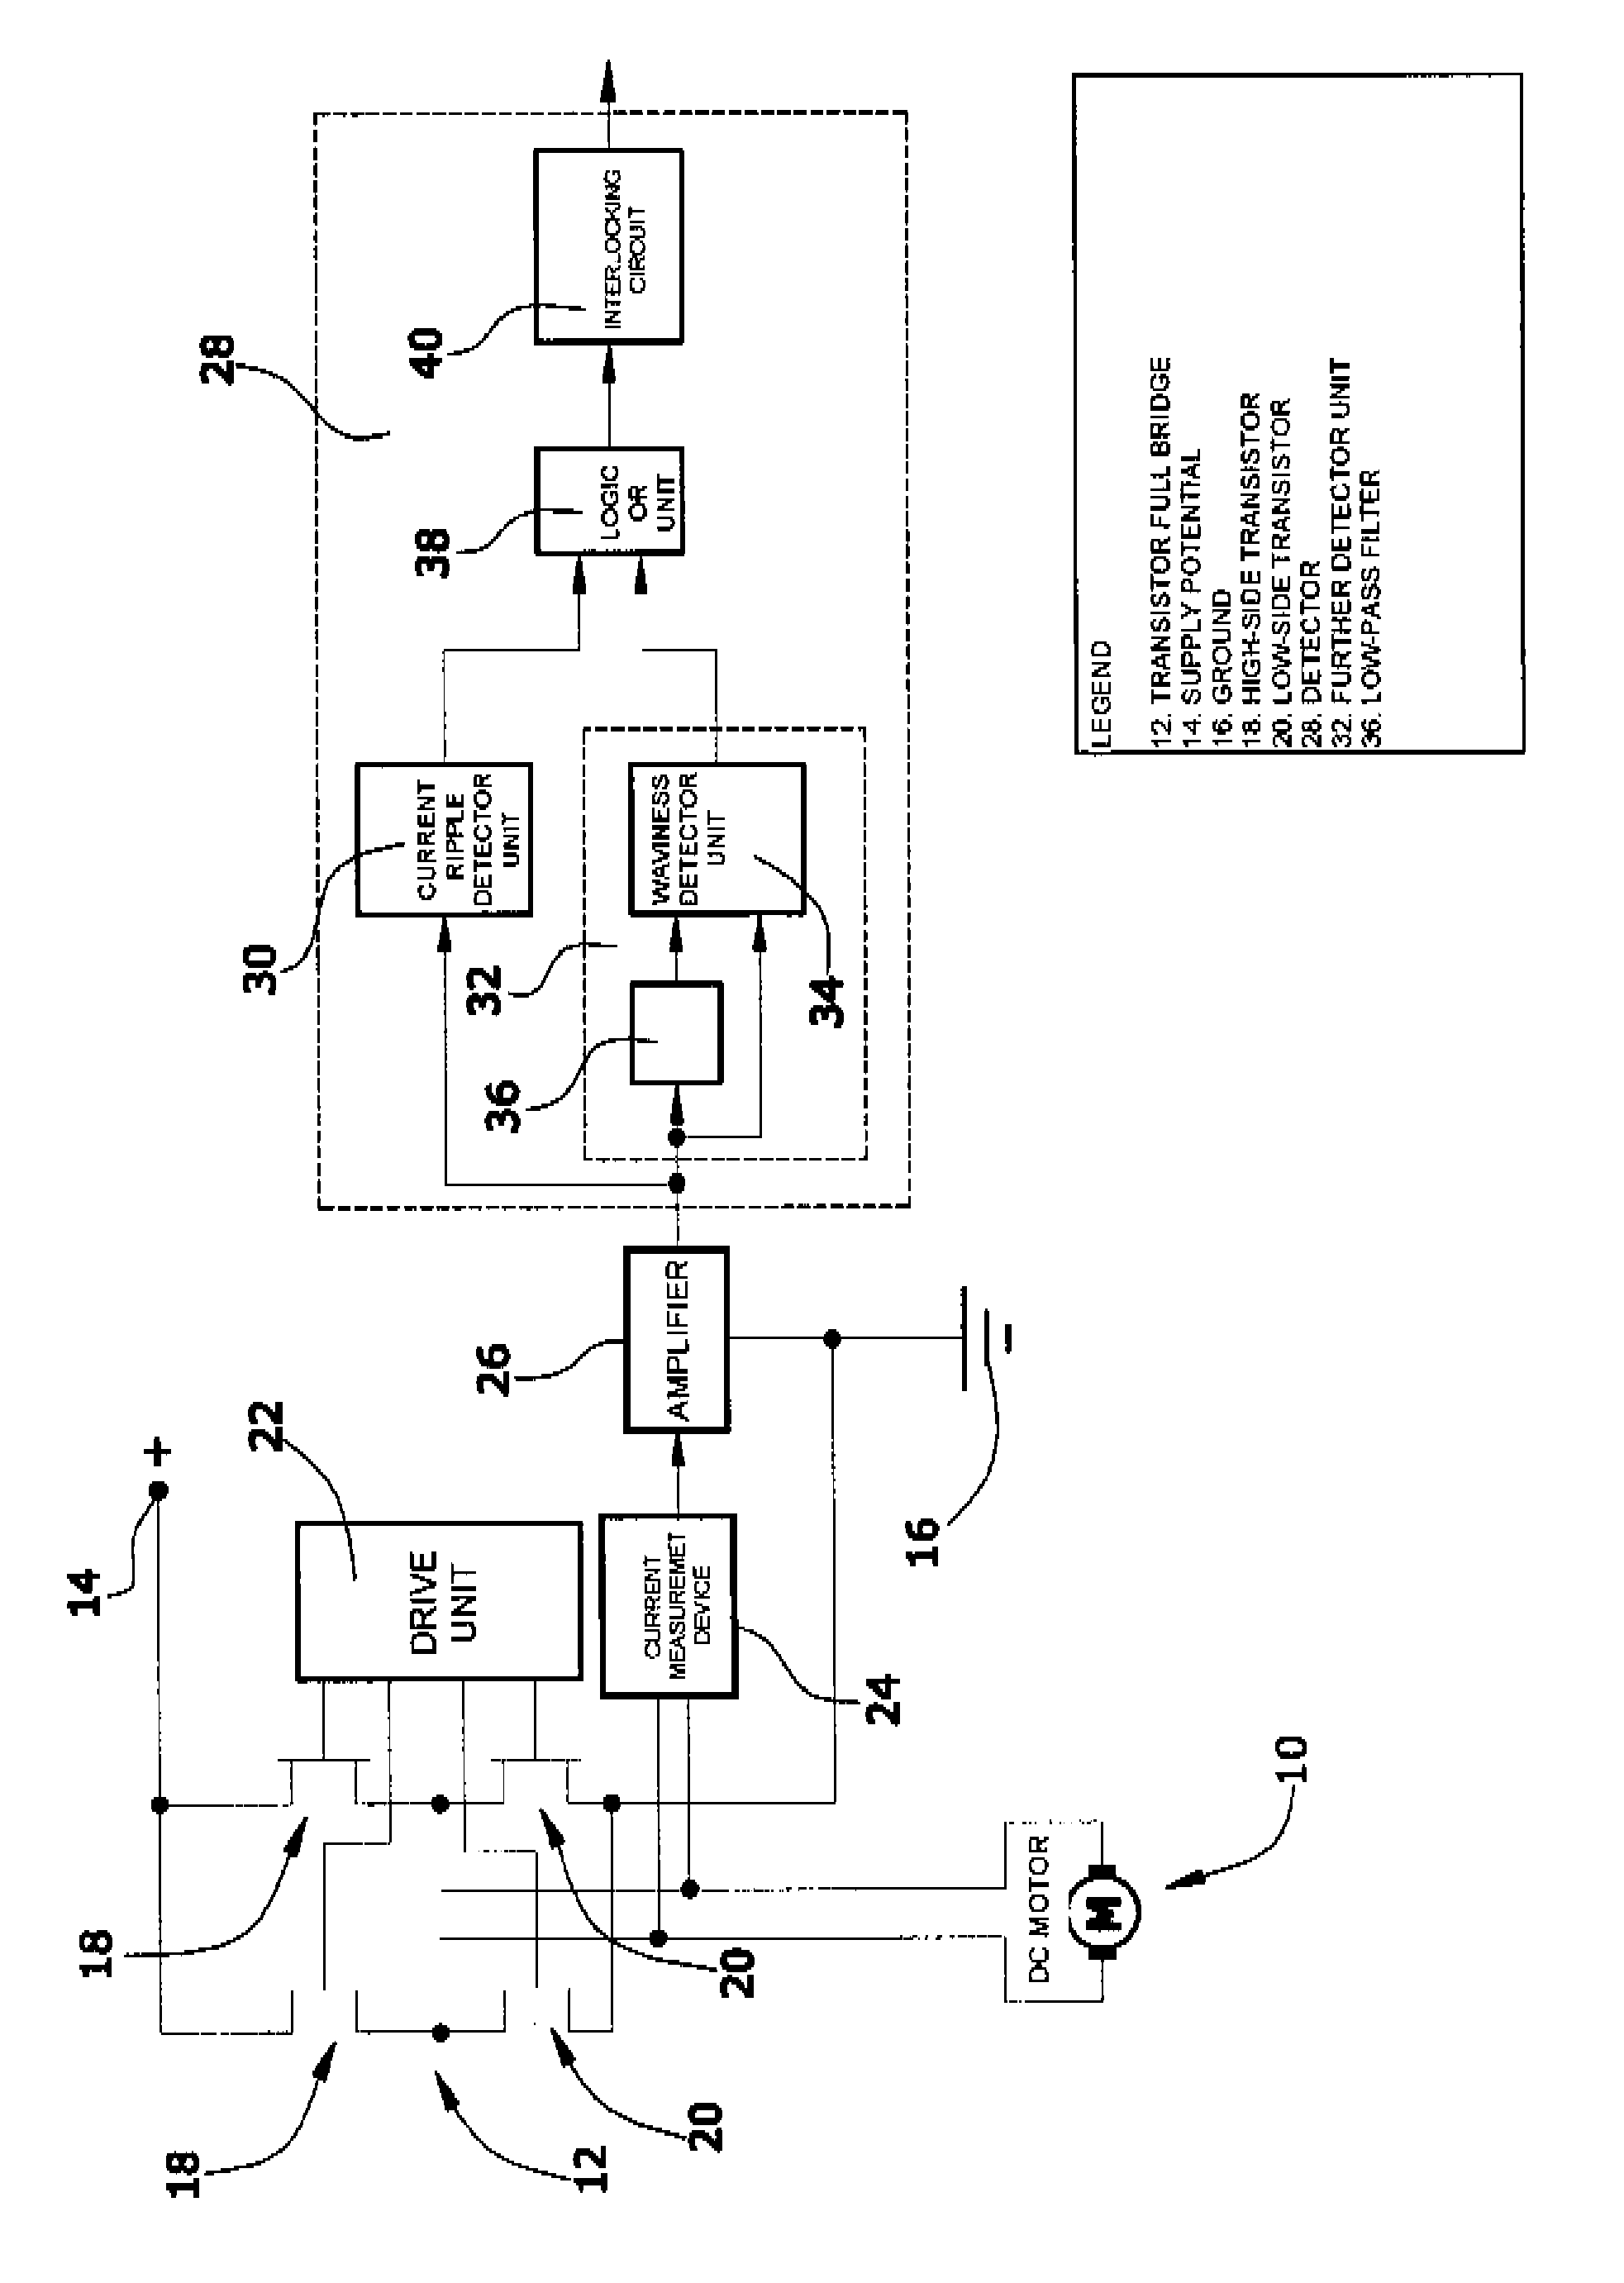 Method for the detection of the rotational position of the rotor of a DC motor with commutator